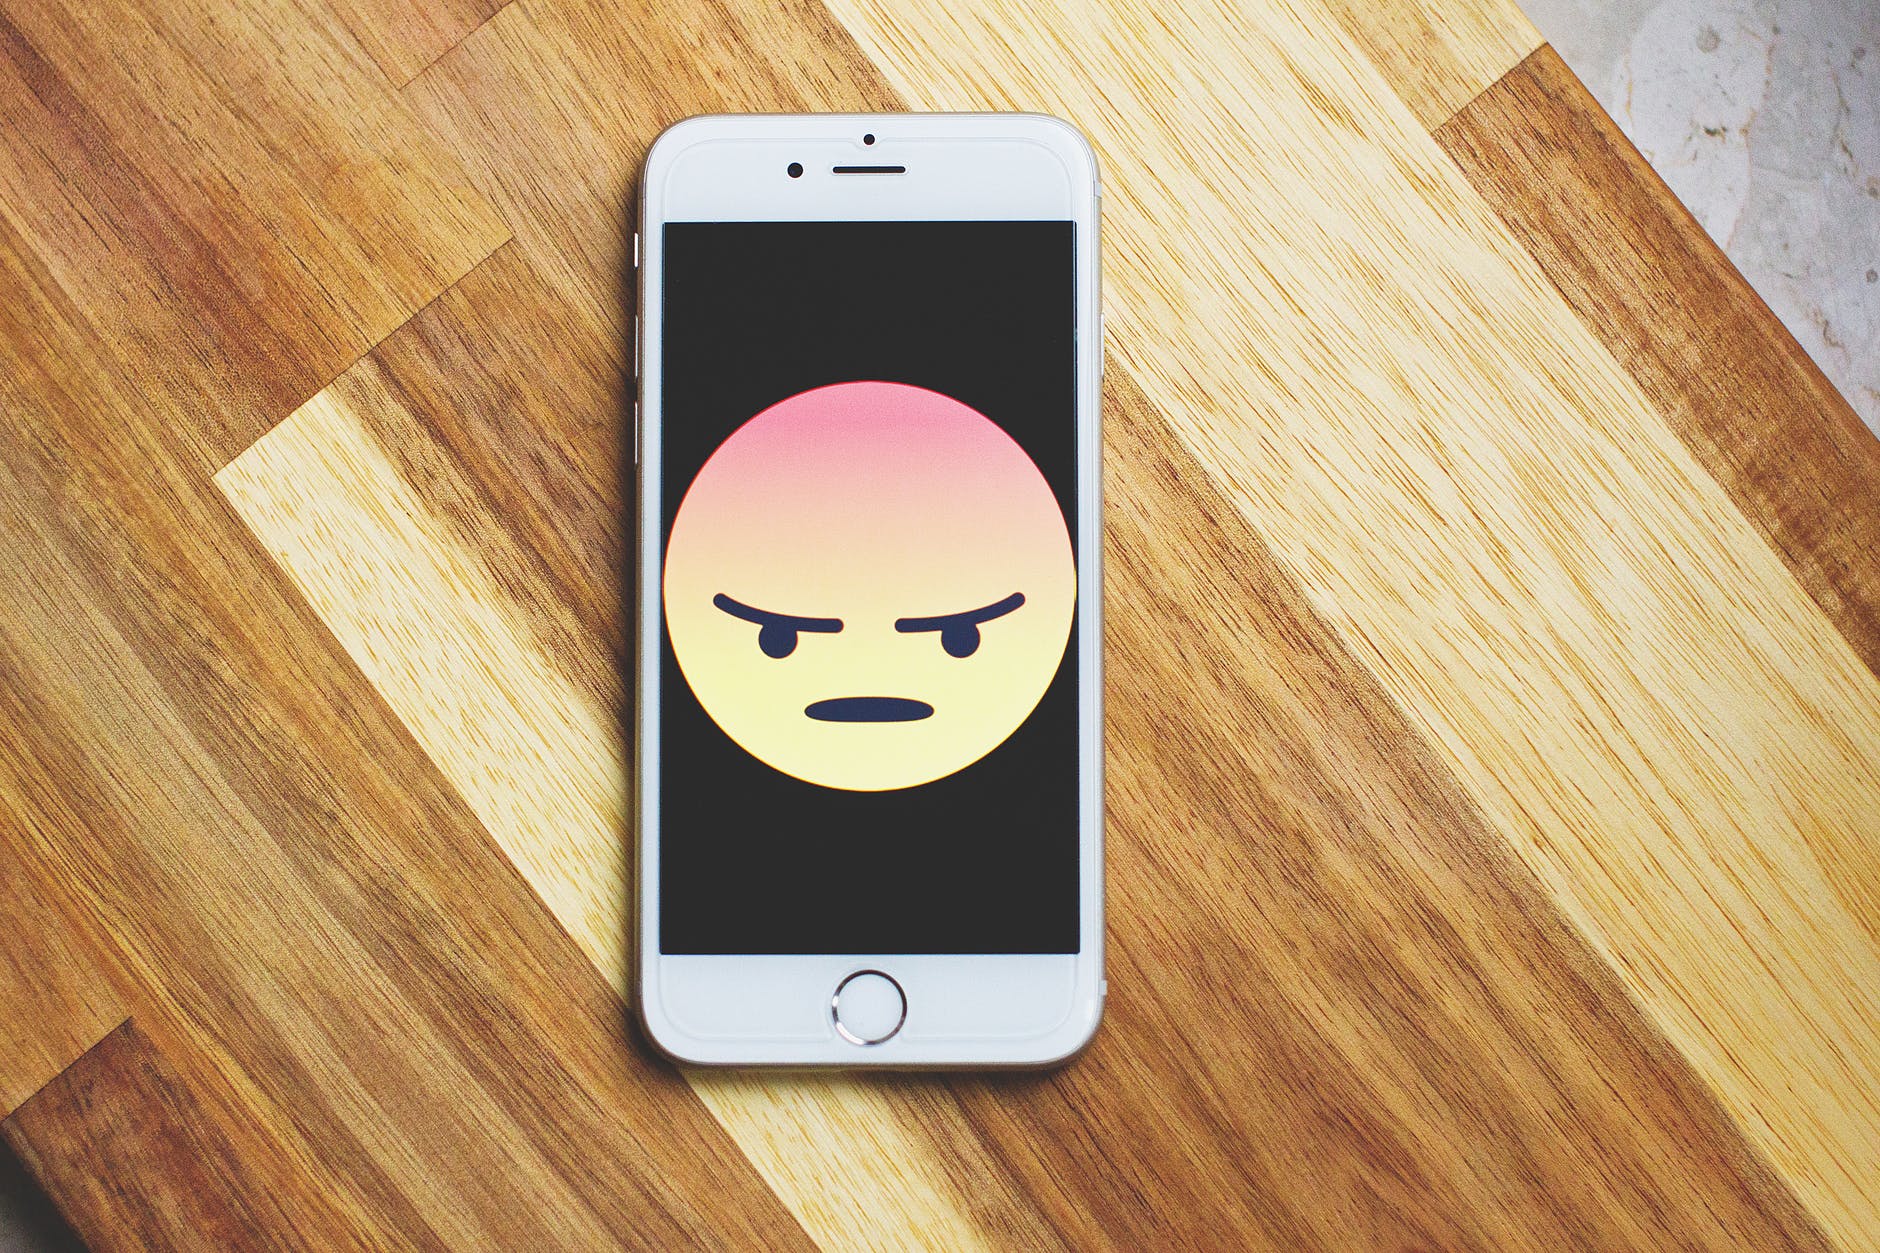 Phone with angry emoji on its screen